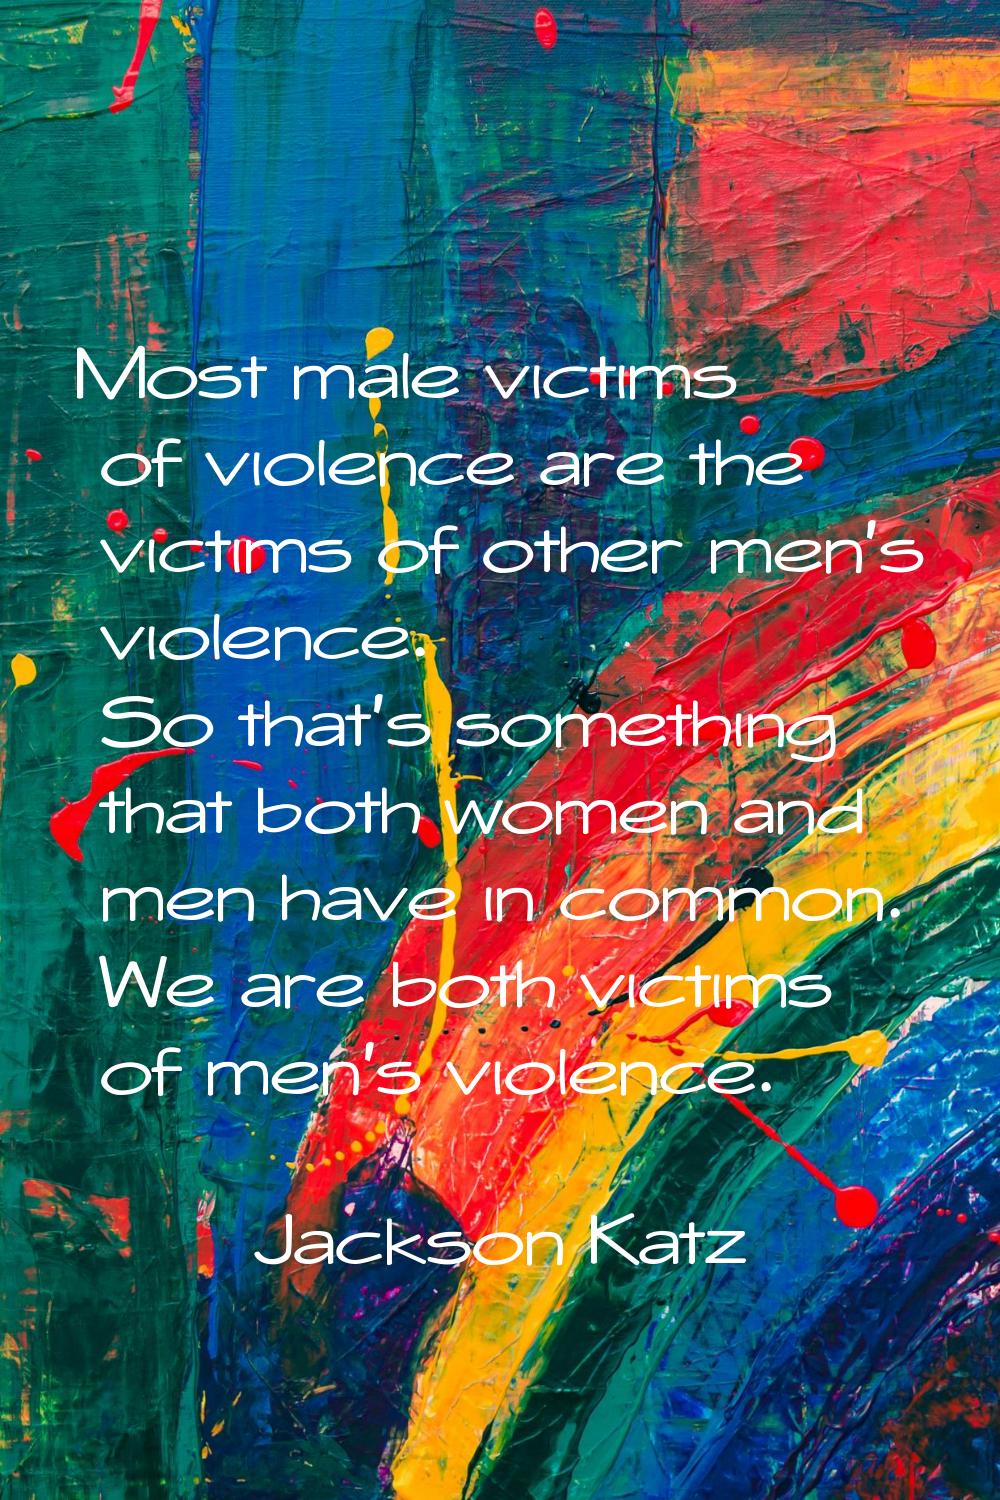 Most male victims of violence are the victims of other men's violence. So that's something that bot